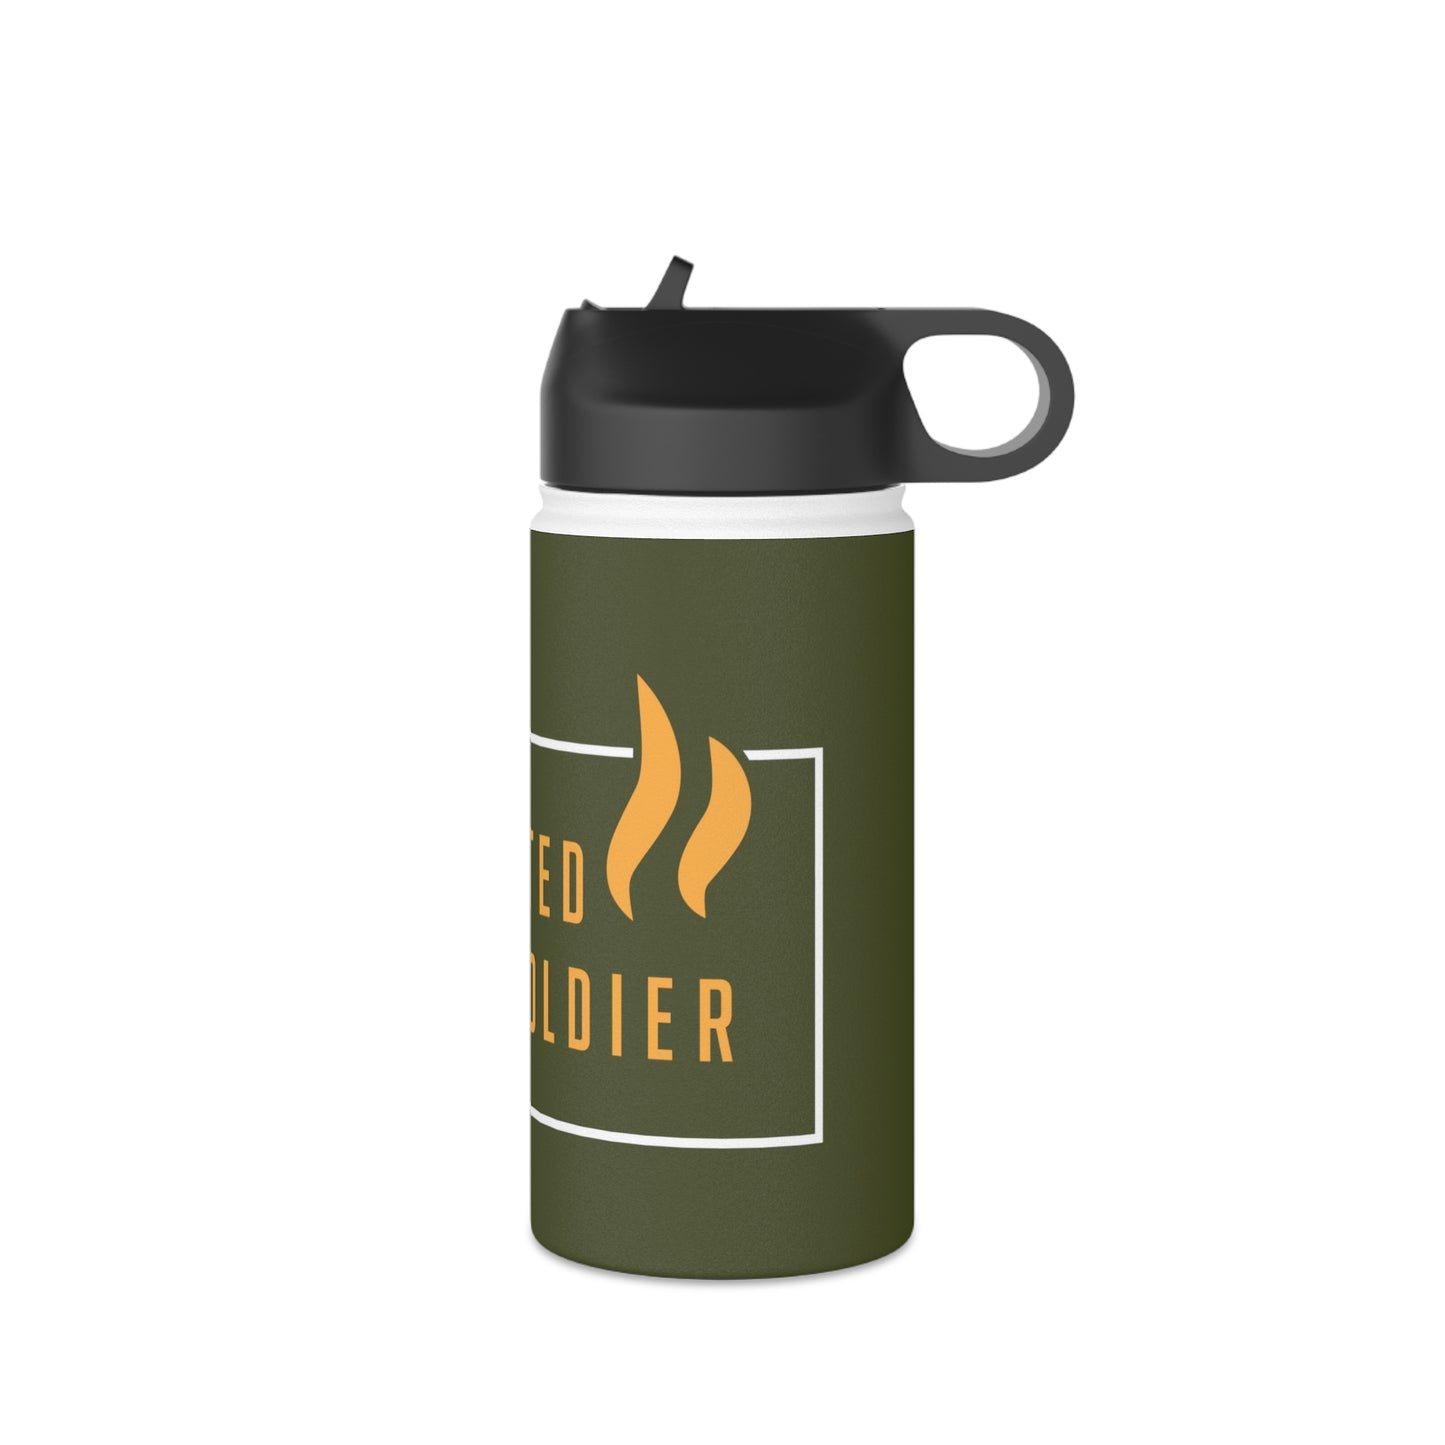 The Scented Soldier Stainless Steel Water Bottle, Standard Lid